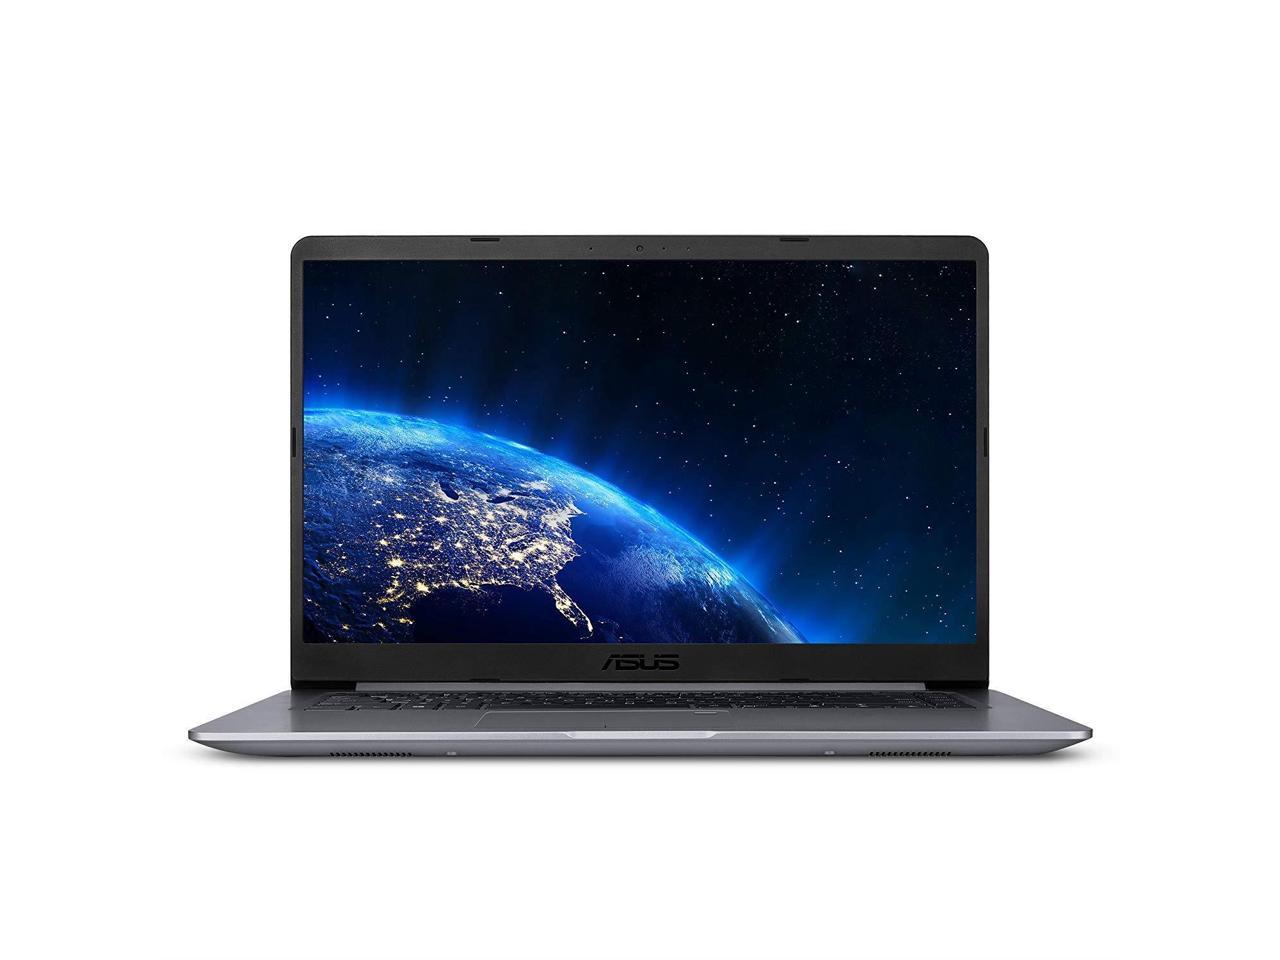 Newest Asus VivoBook Thin & Lightweight Laptop (12G DDR4/256G SSD+1TB HDD)|15.6" Full HD(1920x1080) WideView display| AMD Quad Core A12-9720P Processor| Wi-Fi |Fingerprint Reader|Windows 10 in S Mode